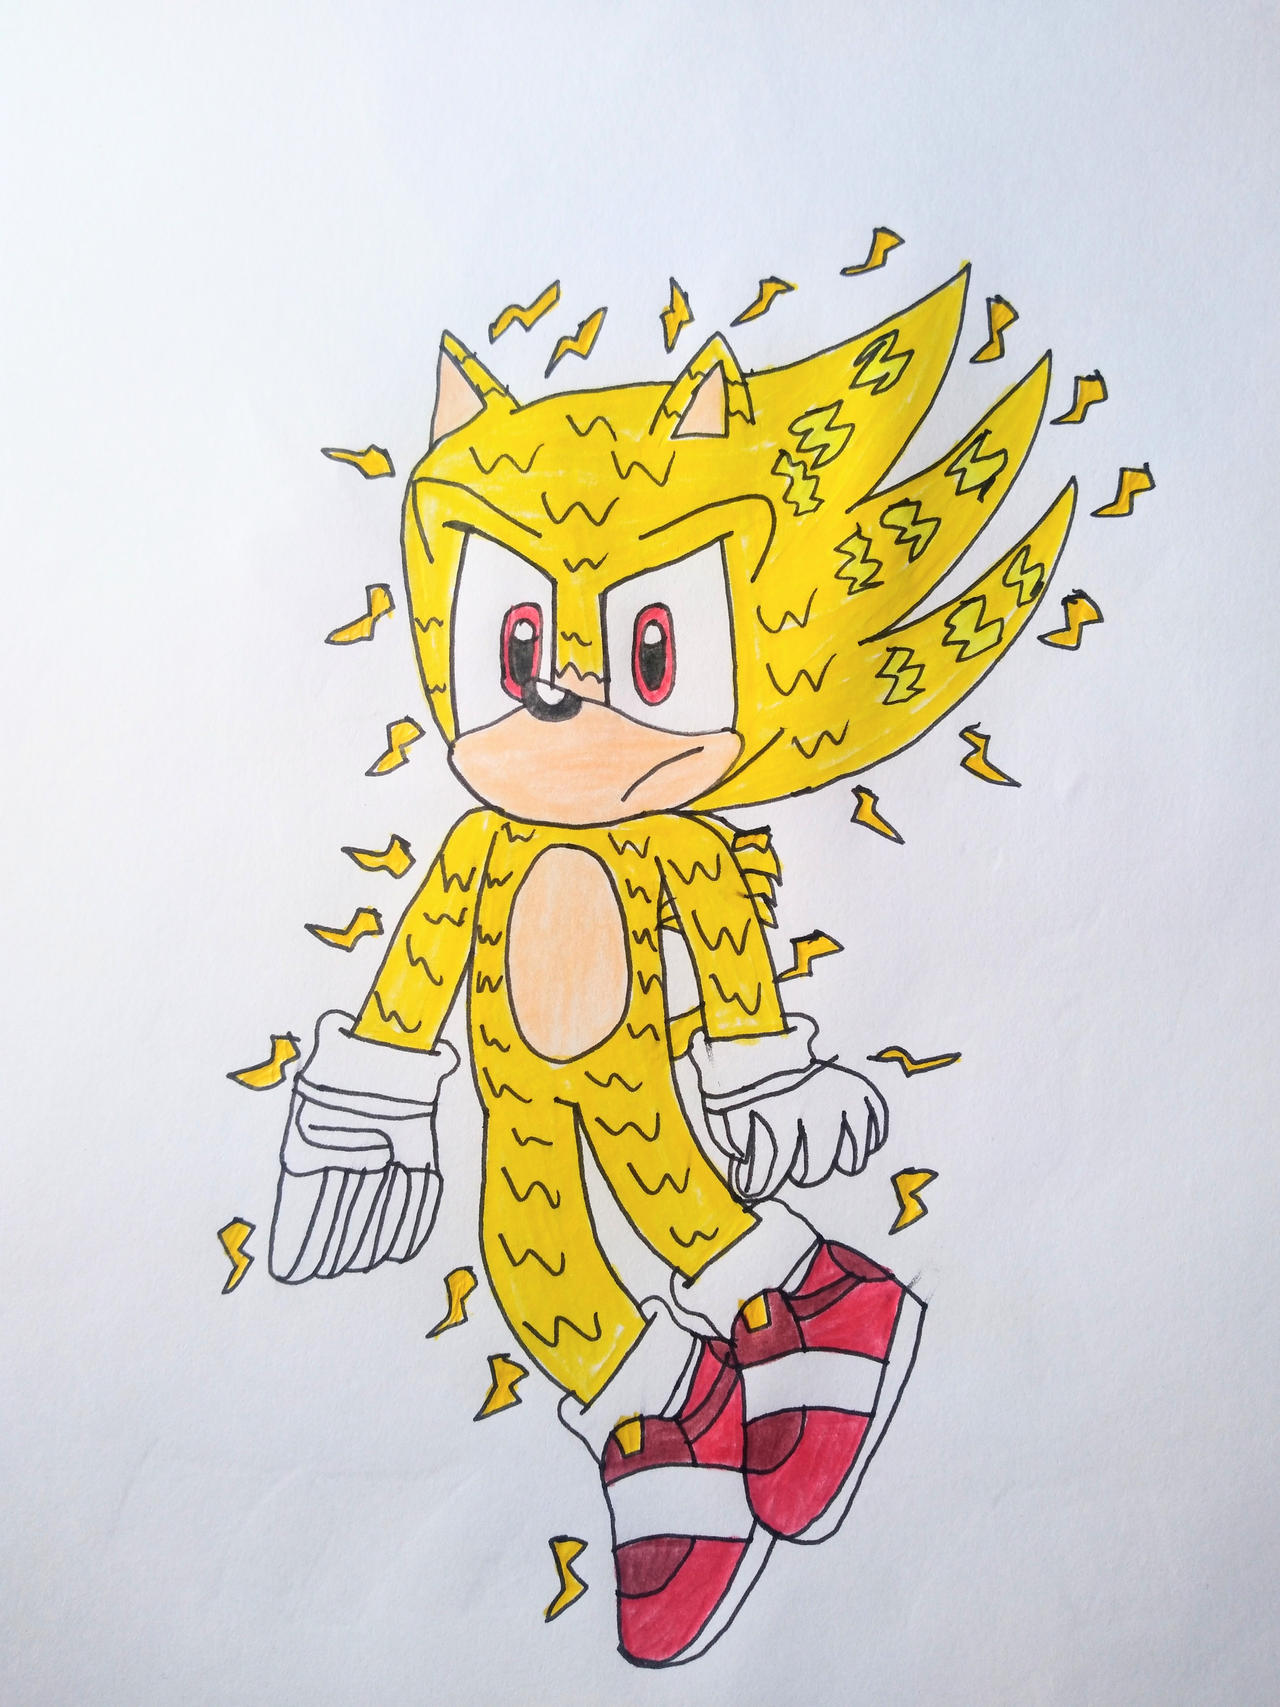 Seba Illustrate on X: #SonicMovie2 #SonicTheHedgehog #SEGA音  #supersonicmovie super sonic movie in the style of my old (lost) drawings  I'm testing a new drawing app *#ParamountPlus #SONIC #sonicart   / X